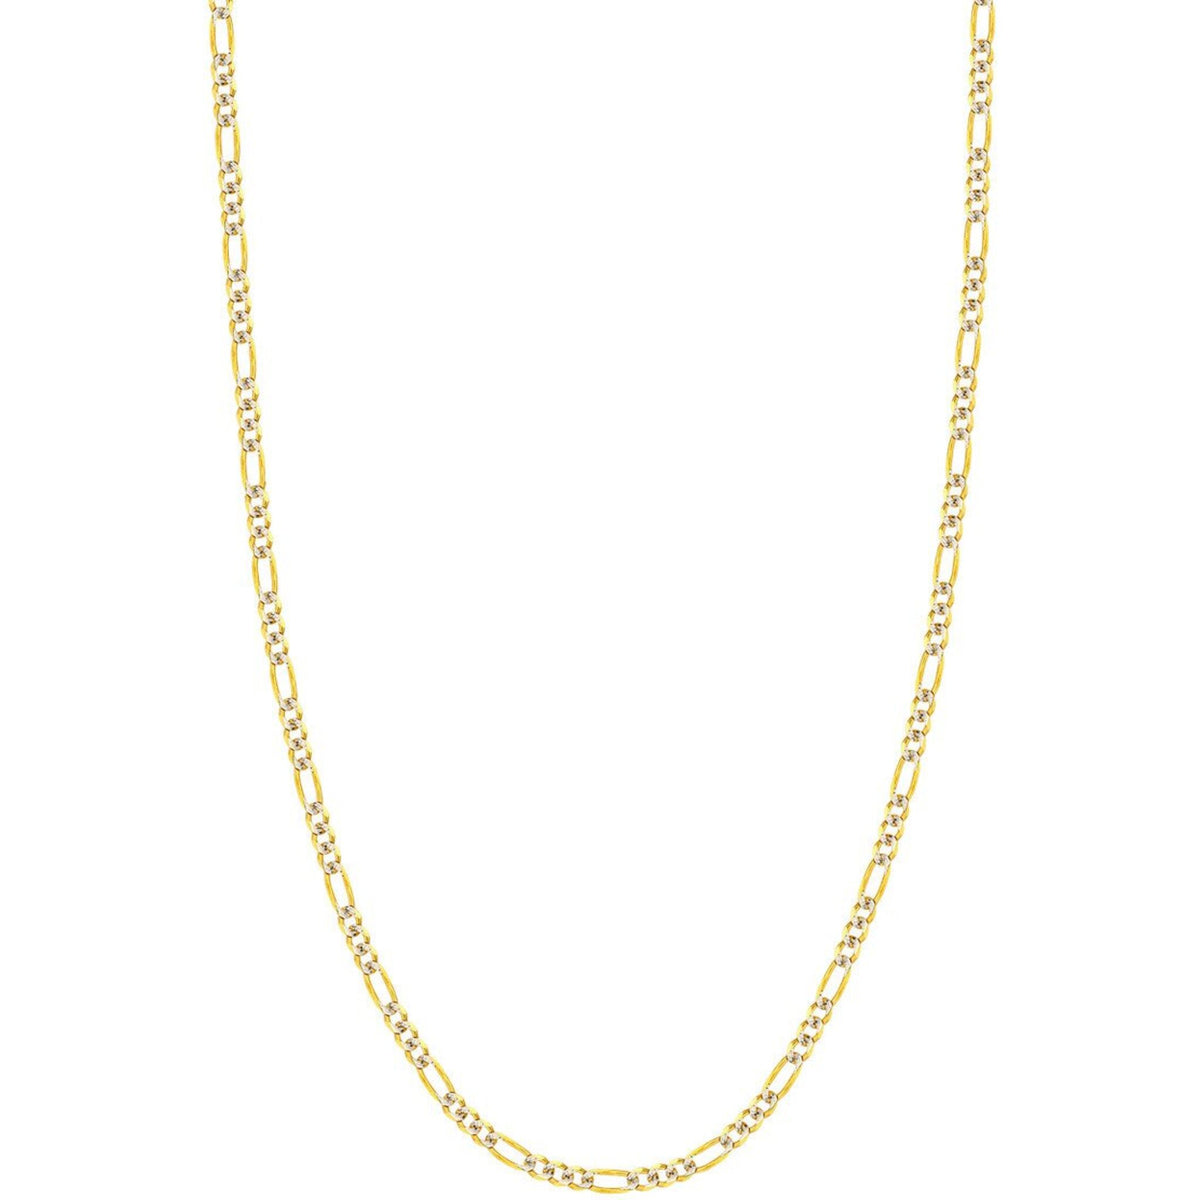 Olas d'Oro 30" Necklace - 14K Yellow/White Gold 3.2mm Two-Tone Pave Figaro Chain with Lobster Lock